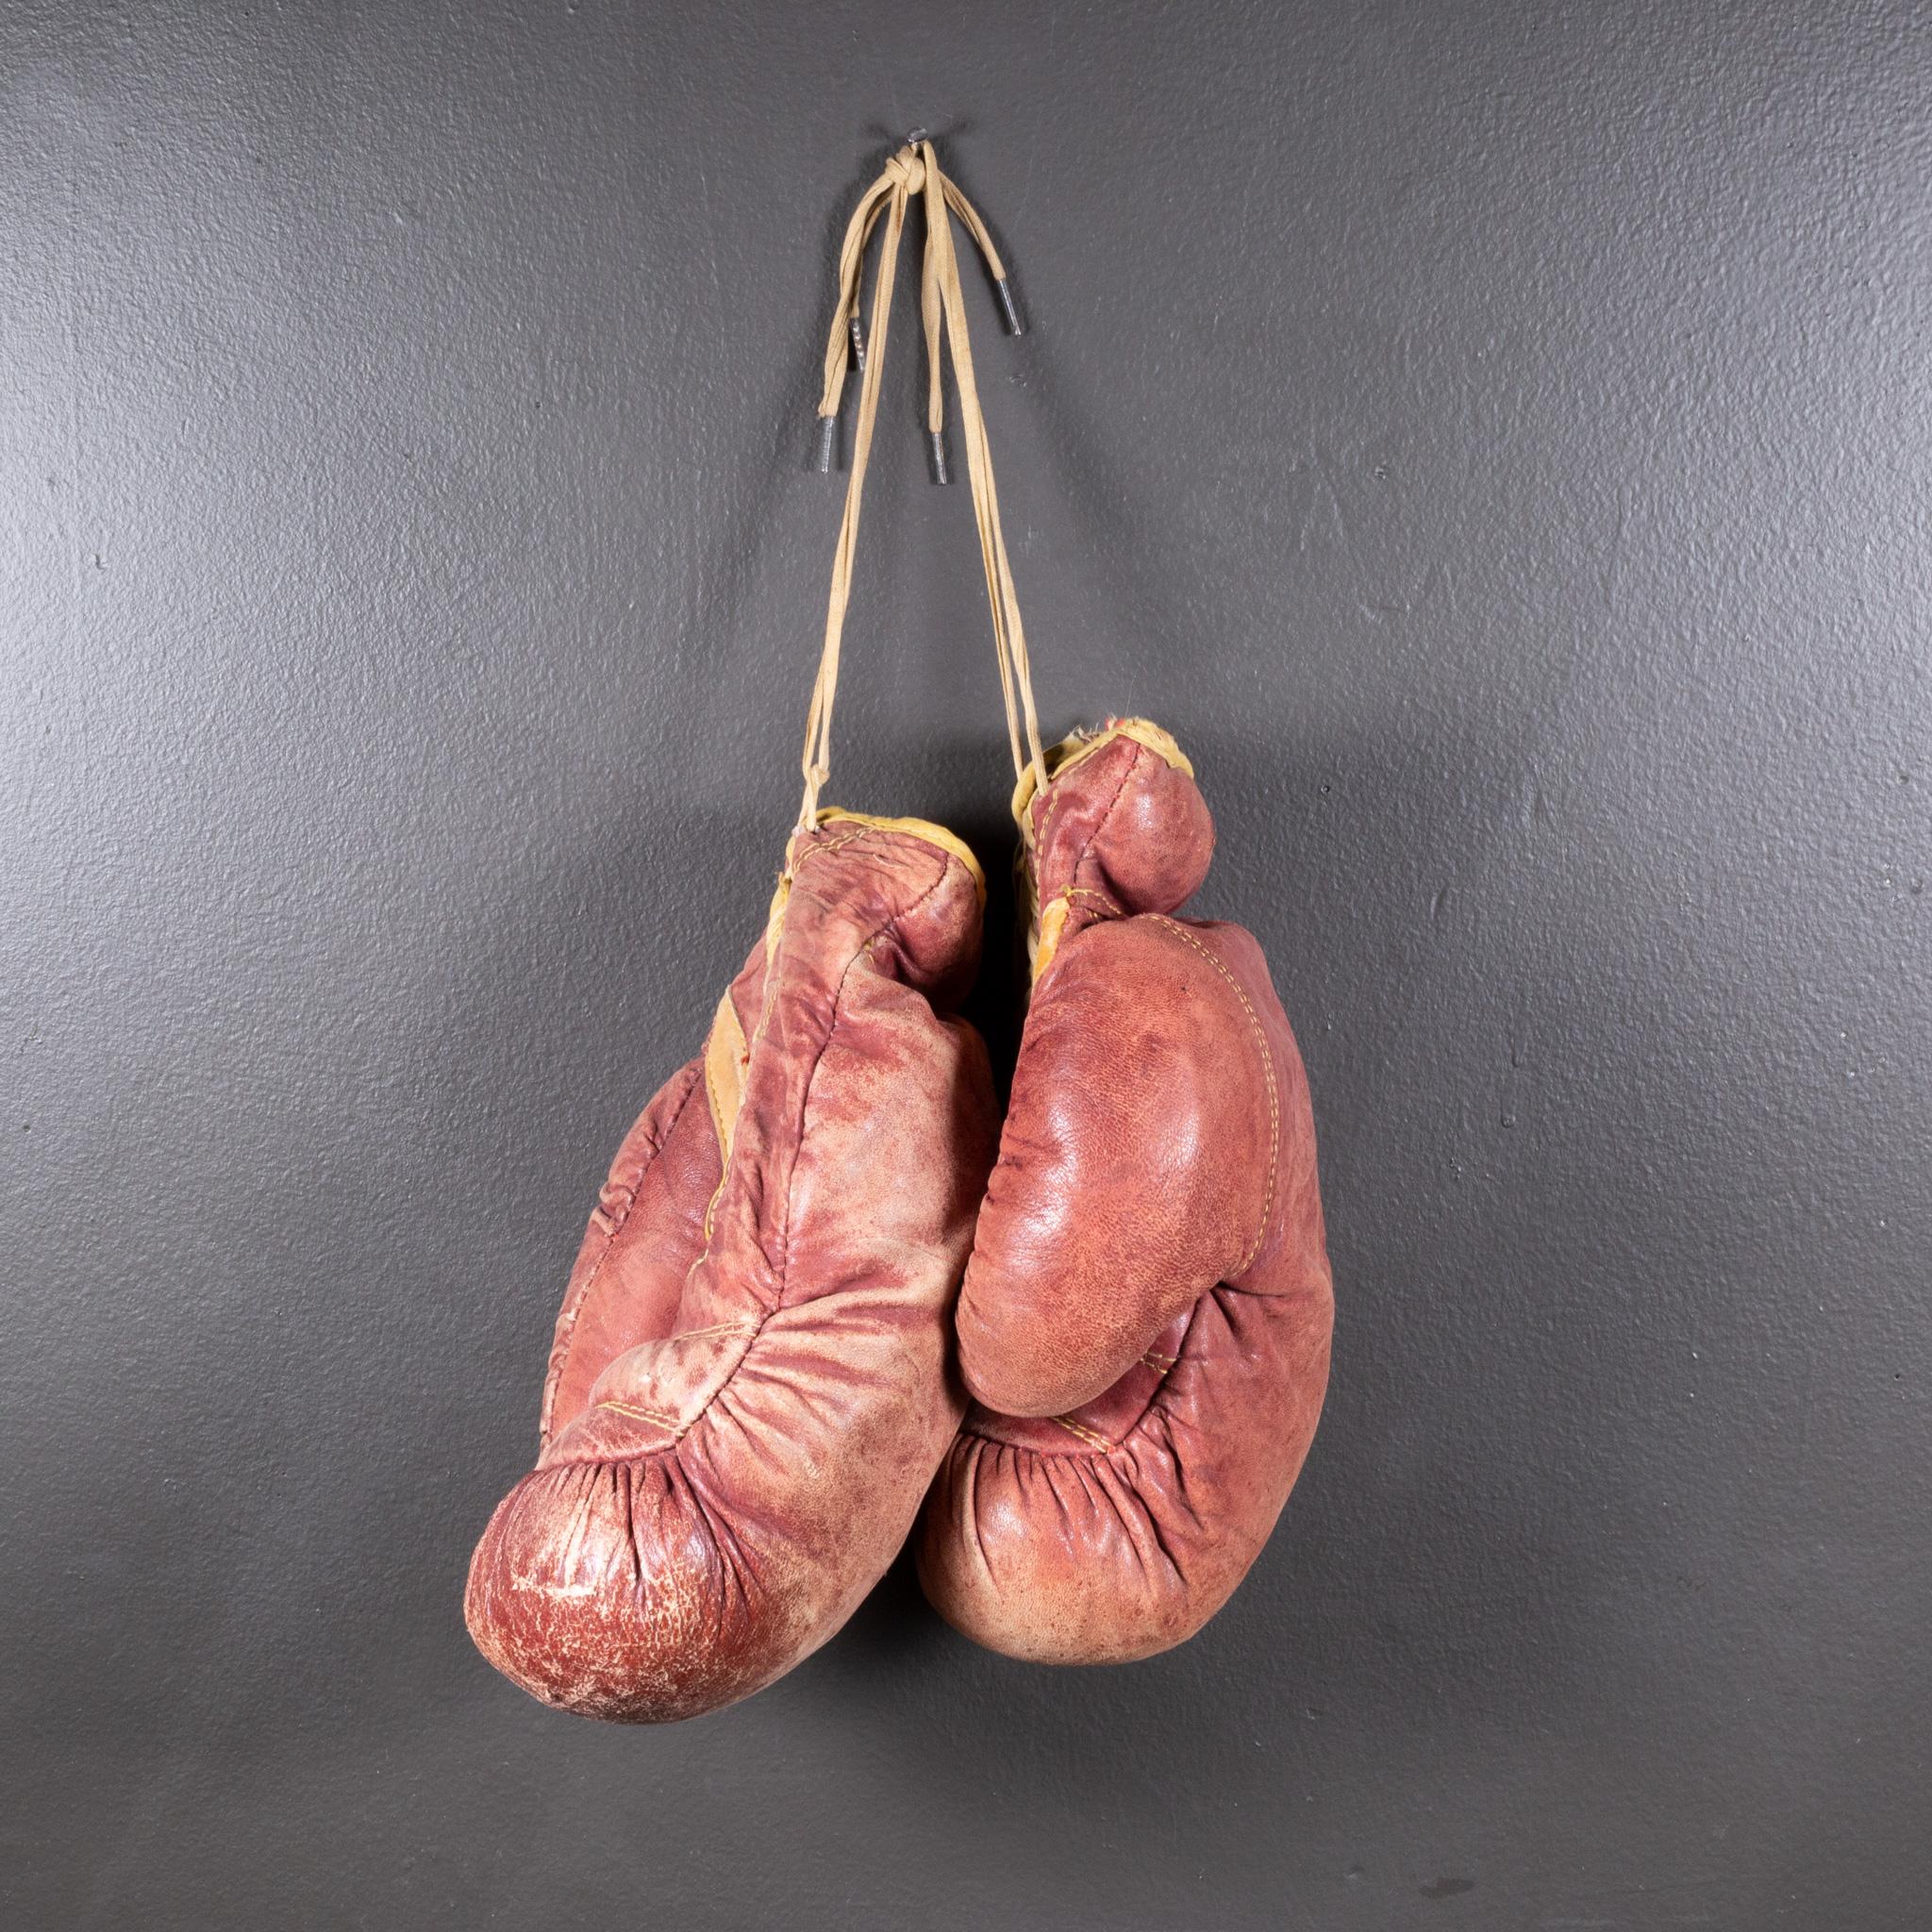 American Vintage Marathon Leather Boxing Gloves c.1950-1960 (FREE SHIPPING) For Sale